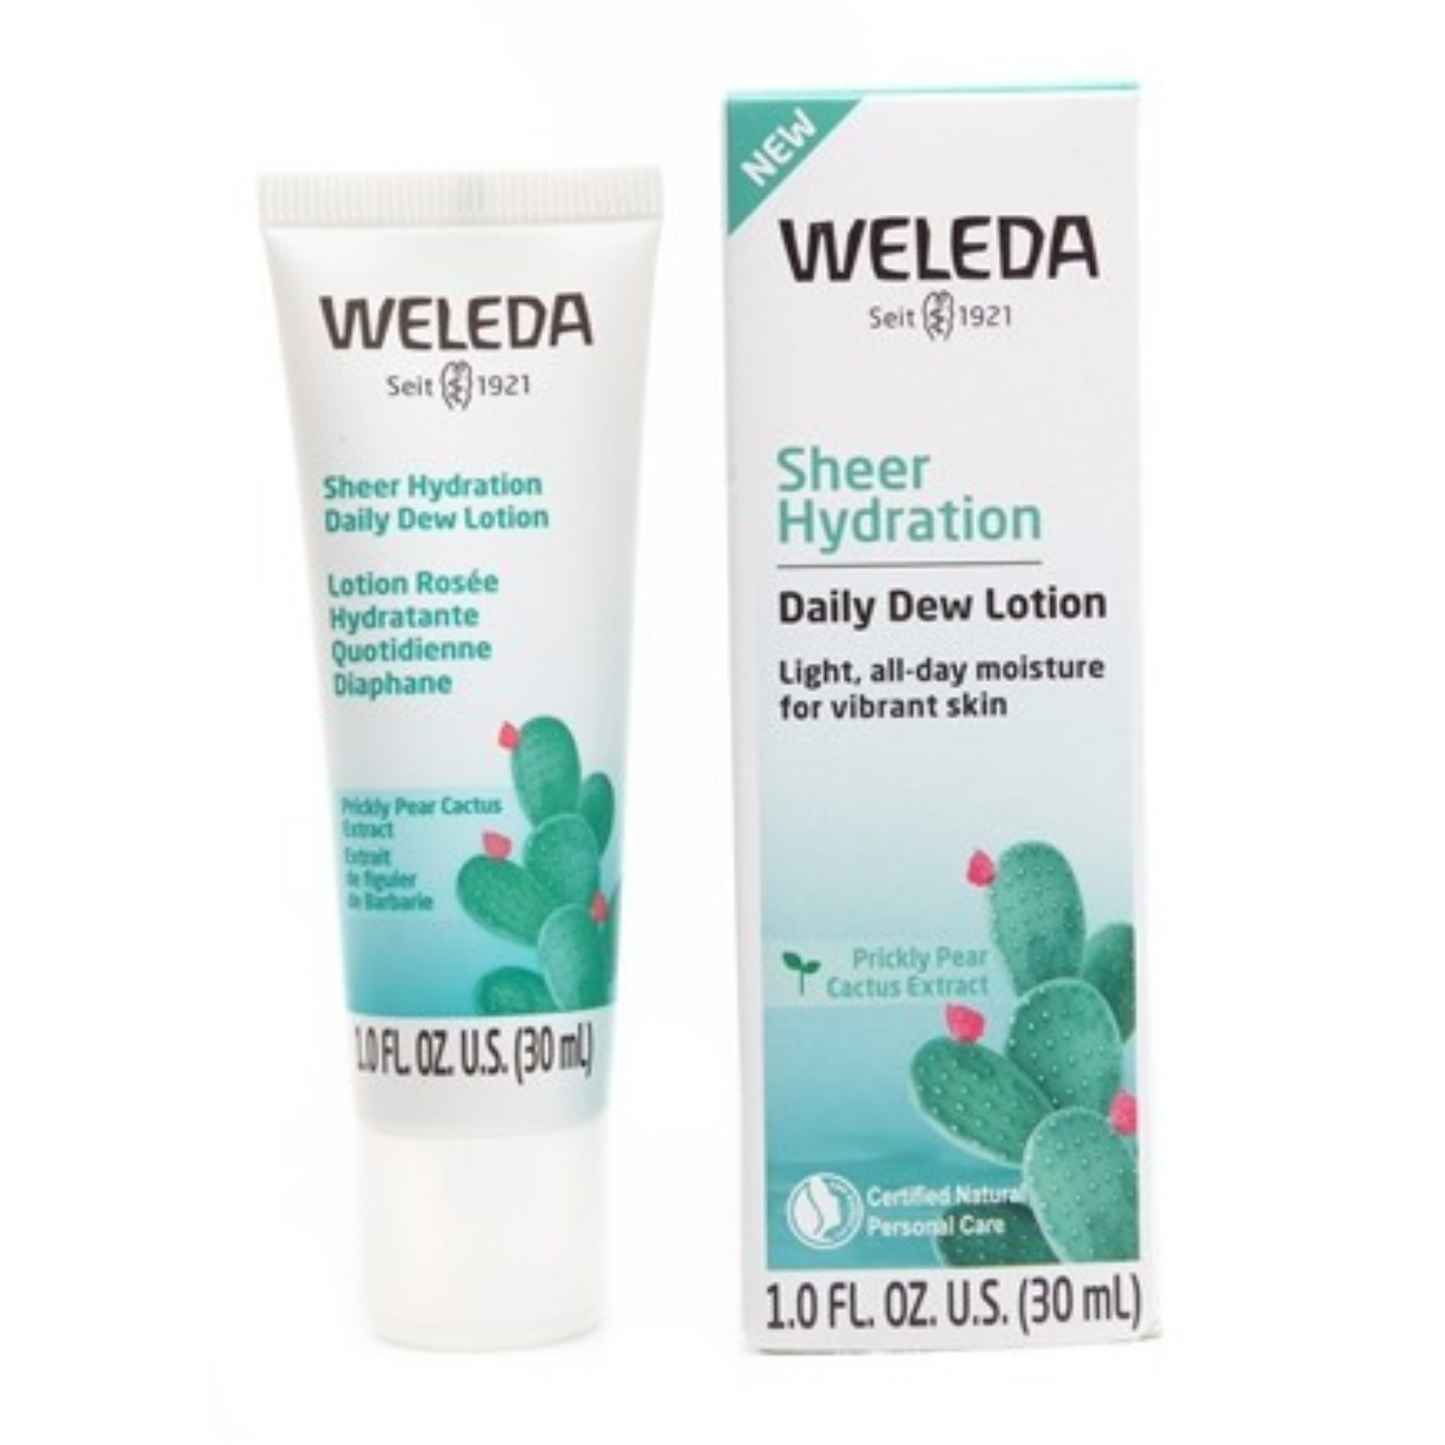 Primary Image of Weleda Sheer Hydration Daily Dew Lotion (1 fl oz) 